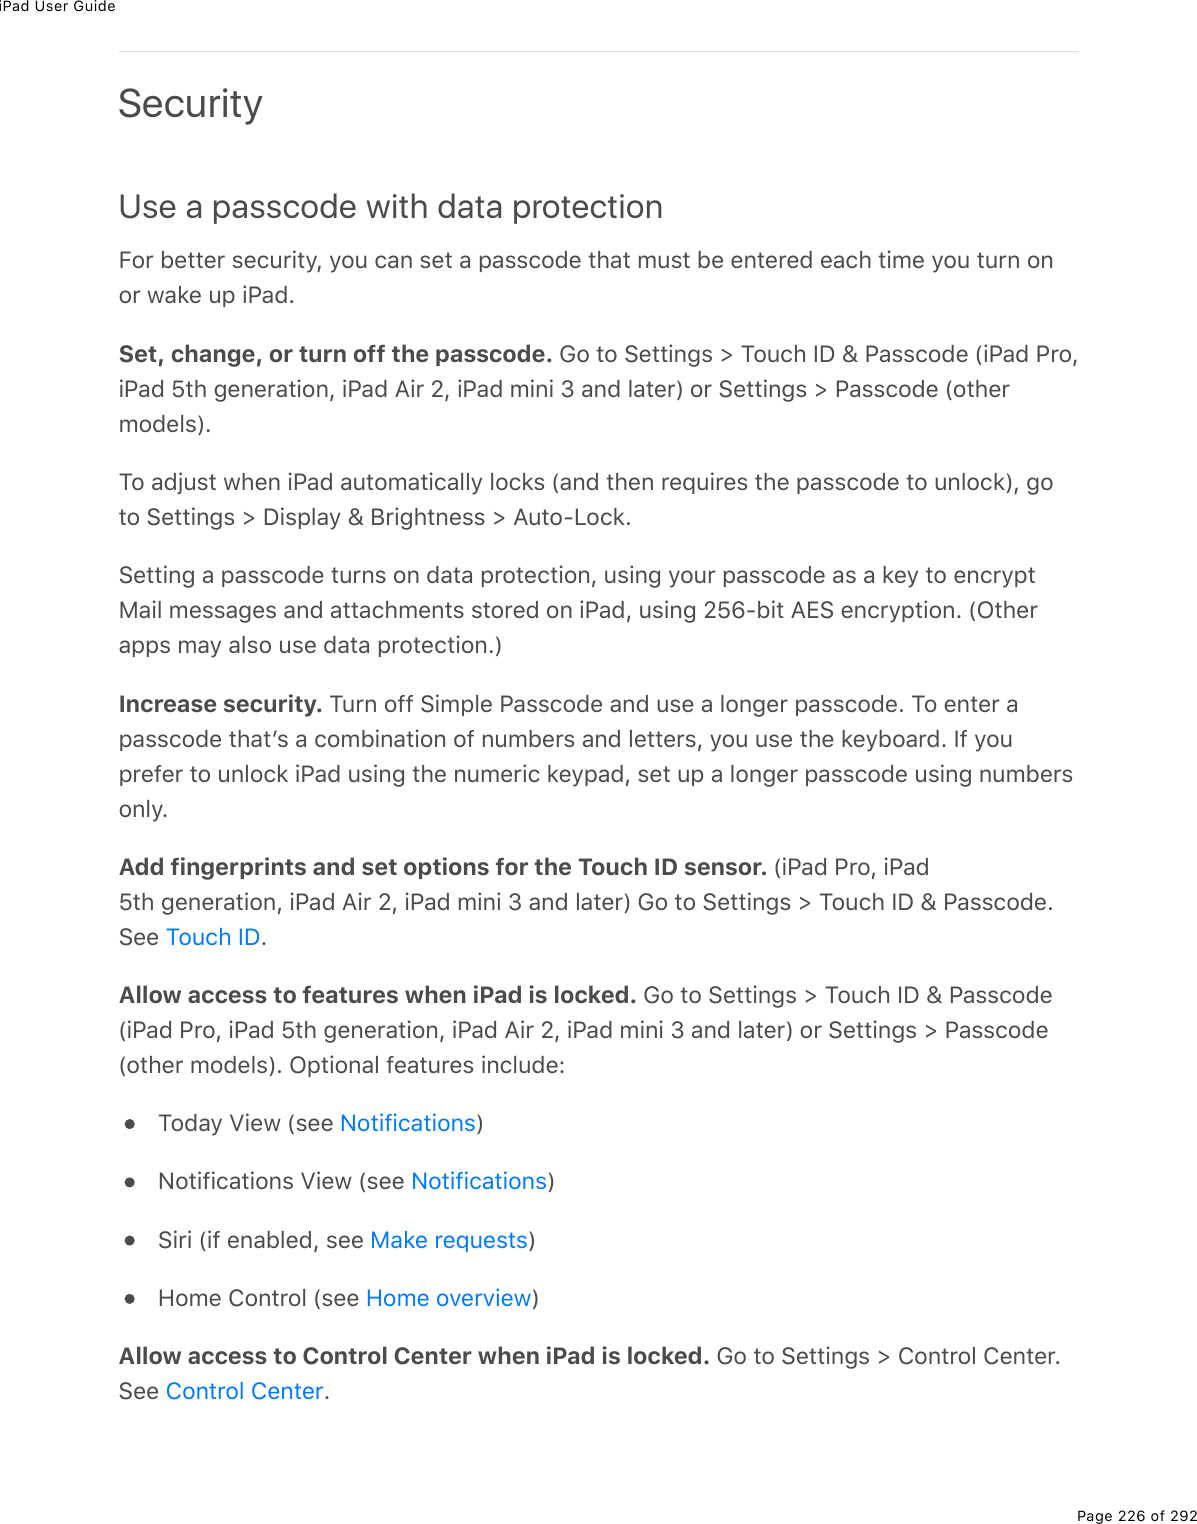 iPad User GuidePage 226 of 292SecurityUse a passcode with data protectionB2$%5(&quot;&quot;($%&amp;()&gt;$.&quot;=L%=2&gt;%)#0%&amp;(&quot;%#%-#&amp;&amp;)27(%&quot;*#&quot;%/&gt;&amp;&quot;%5(%(0&quot;($(7%(#)*%&quot;./(%=2&gt;%&quot;&gt;$0%202$%1#&apos;(%&gt;-%.@#7ESet, change, or turn off the passcode. 62%&quot;2%!(&quot;&quot;.0;&amp;%[%M2&gt;)*%SP%\%@#&amp;&amp;)27(%W.@#7%@$2L.@#7%^&quot;*%;(0($#&quot;.20L%.@#7%?.$%_L%.@#7%/.0.%N%#07%3#&quot;($X%2$%!(&quot;&quot;.0;&amp;%[%@#&amp;&amp;)27(%W2&quot;*($/27(3&amp;XEM2%#7U&gt;&amp;&quot;%1*(0%.@#7%#&gt;&quot;2/#&quot;.)#33=%32)&apos;&amp;%W#07%&quot;*(0%$(]&gt;.$(&amp;%&quot;*(%-#&amp;&amp;)27(%&quot;2%&gt;032)&apos;XL%;2&quot;2%!(&quot;&quot;.0;&amp;%[%P.&amp;-3#=%\%J$.;*&quot;0(&amp;&amp;%[%?&gt;&quot;2QV2)&apos;E!(&quot;&quot;.0;%#%-#&amp;&amp;)27(%&quot;&gt;$0&amp;%20%7#&quot;#%-$2&quot;()&quot;.20L%&gt;&amp;.0;%=2&gt;$%-#&amp;&amp;)27(%#&amp;%#%&apos;(=%&quot;2%(0)$=-&quot;8#.3%/(&amp;&amp;#;(&amp;%#07%#&quot;&quot;#)*/(0&quot;&amp;%&amp;&quot;2$(7%20%.@#7L%&gt;&amp;.0;%_^wQ5.&quot;%?+!%(0)$=-&quot;.20E%WG&quot;*($#--&amp;%/#=%#3&amp;2%&gt;&amp;(%7#&quot;#%-$2&quot;()&quot;.20EXIncrease security. M&gt;$0%299%!./-3(%@#&amp;&amp;)27(%#07%&gt;&amp;(%#%320;($%-#&amp;&amp;)27(E%M2%(0&quot;($%#-#&amp;&amp;)27(%&quot;*#&quot;F&amp;%#%)2/5.0#&quot;.20%29%0&gt;/5($&amp;%#07%3(&quot;&quot;($&amp;L%=2&gt;%&gt;&amp;(%&quot;*(%&apos;(=52#$7E%S9%=2&gt;-$(9($%&quot;2%&gt;032)&apos;%.@#7%&gt;&amp;.0;%&quot;*(%0&gt;/($.)%&apos;(=-#7L%&amp;(&quot;%&gt;-%#%320;($%-#&amp;&amp;)27(%&gt;&amp;.0;%0&gt;/5($&amp;203=EAdd fingerprints and set options for the Touch ID sensor. W.@#7%@$2L%.@#7^&quot;*%;(0($#&quot;.20L%.@#7%?.$%_L%.@#7%/.0.%N%#07%3#&quot;($X%62%&quot;2%!(&quot;&quot;.0;&amp;%[%M2&gt;)*%SP%\%@#&amp;&amp;)27(E!((% EAllow access to features when iPad is locked. 62%&quot;2%!(&quot;&quot;.0;&amp;%[%M2&gt;)*%SP%\%@#&amp;&amp;)27(W.@#7%@$2L%.@#7%^&quot;*%;(0($#&quot;.20L%.@#7%?.$%_L%.@#7%/.0.%N%#07%3#&quot;($X%2$%!(&quot;&quot;.0;&amp;%[%@#&amp;&amp;)27(W2&quot;*($%/27(3&amp;XE%G-&quot;.20#3%9(#&quot;&gt;$(&amp;%.0)3&gt;7(OM27#=%T.(1%W&amp;((% XC2&quot;.9.)#&quot;.20&amp;%T.(1%W&amp;((% X!.$.%W.9%(0#53(7L%&amp;((% XA2/(%420&quot;$23%W&amp;((% XAllow access to Control Center when iPad is locked. 62%&quot;2%!(&quot;&quot;.0;&amp;%[%420&quot;$23%4(0&quot;($E!((% EM2&gt;)*%SPC2&quot;.9.)#&quot;.20&amp;C2&quot;.9.)#&quot;.20&amp;8#&apos;(%$(]&gt;(&amp;&quot;&amp;A2/(%2D($D.(1420&quot;$23%4(0&quot;($